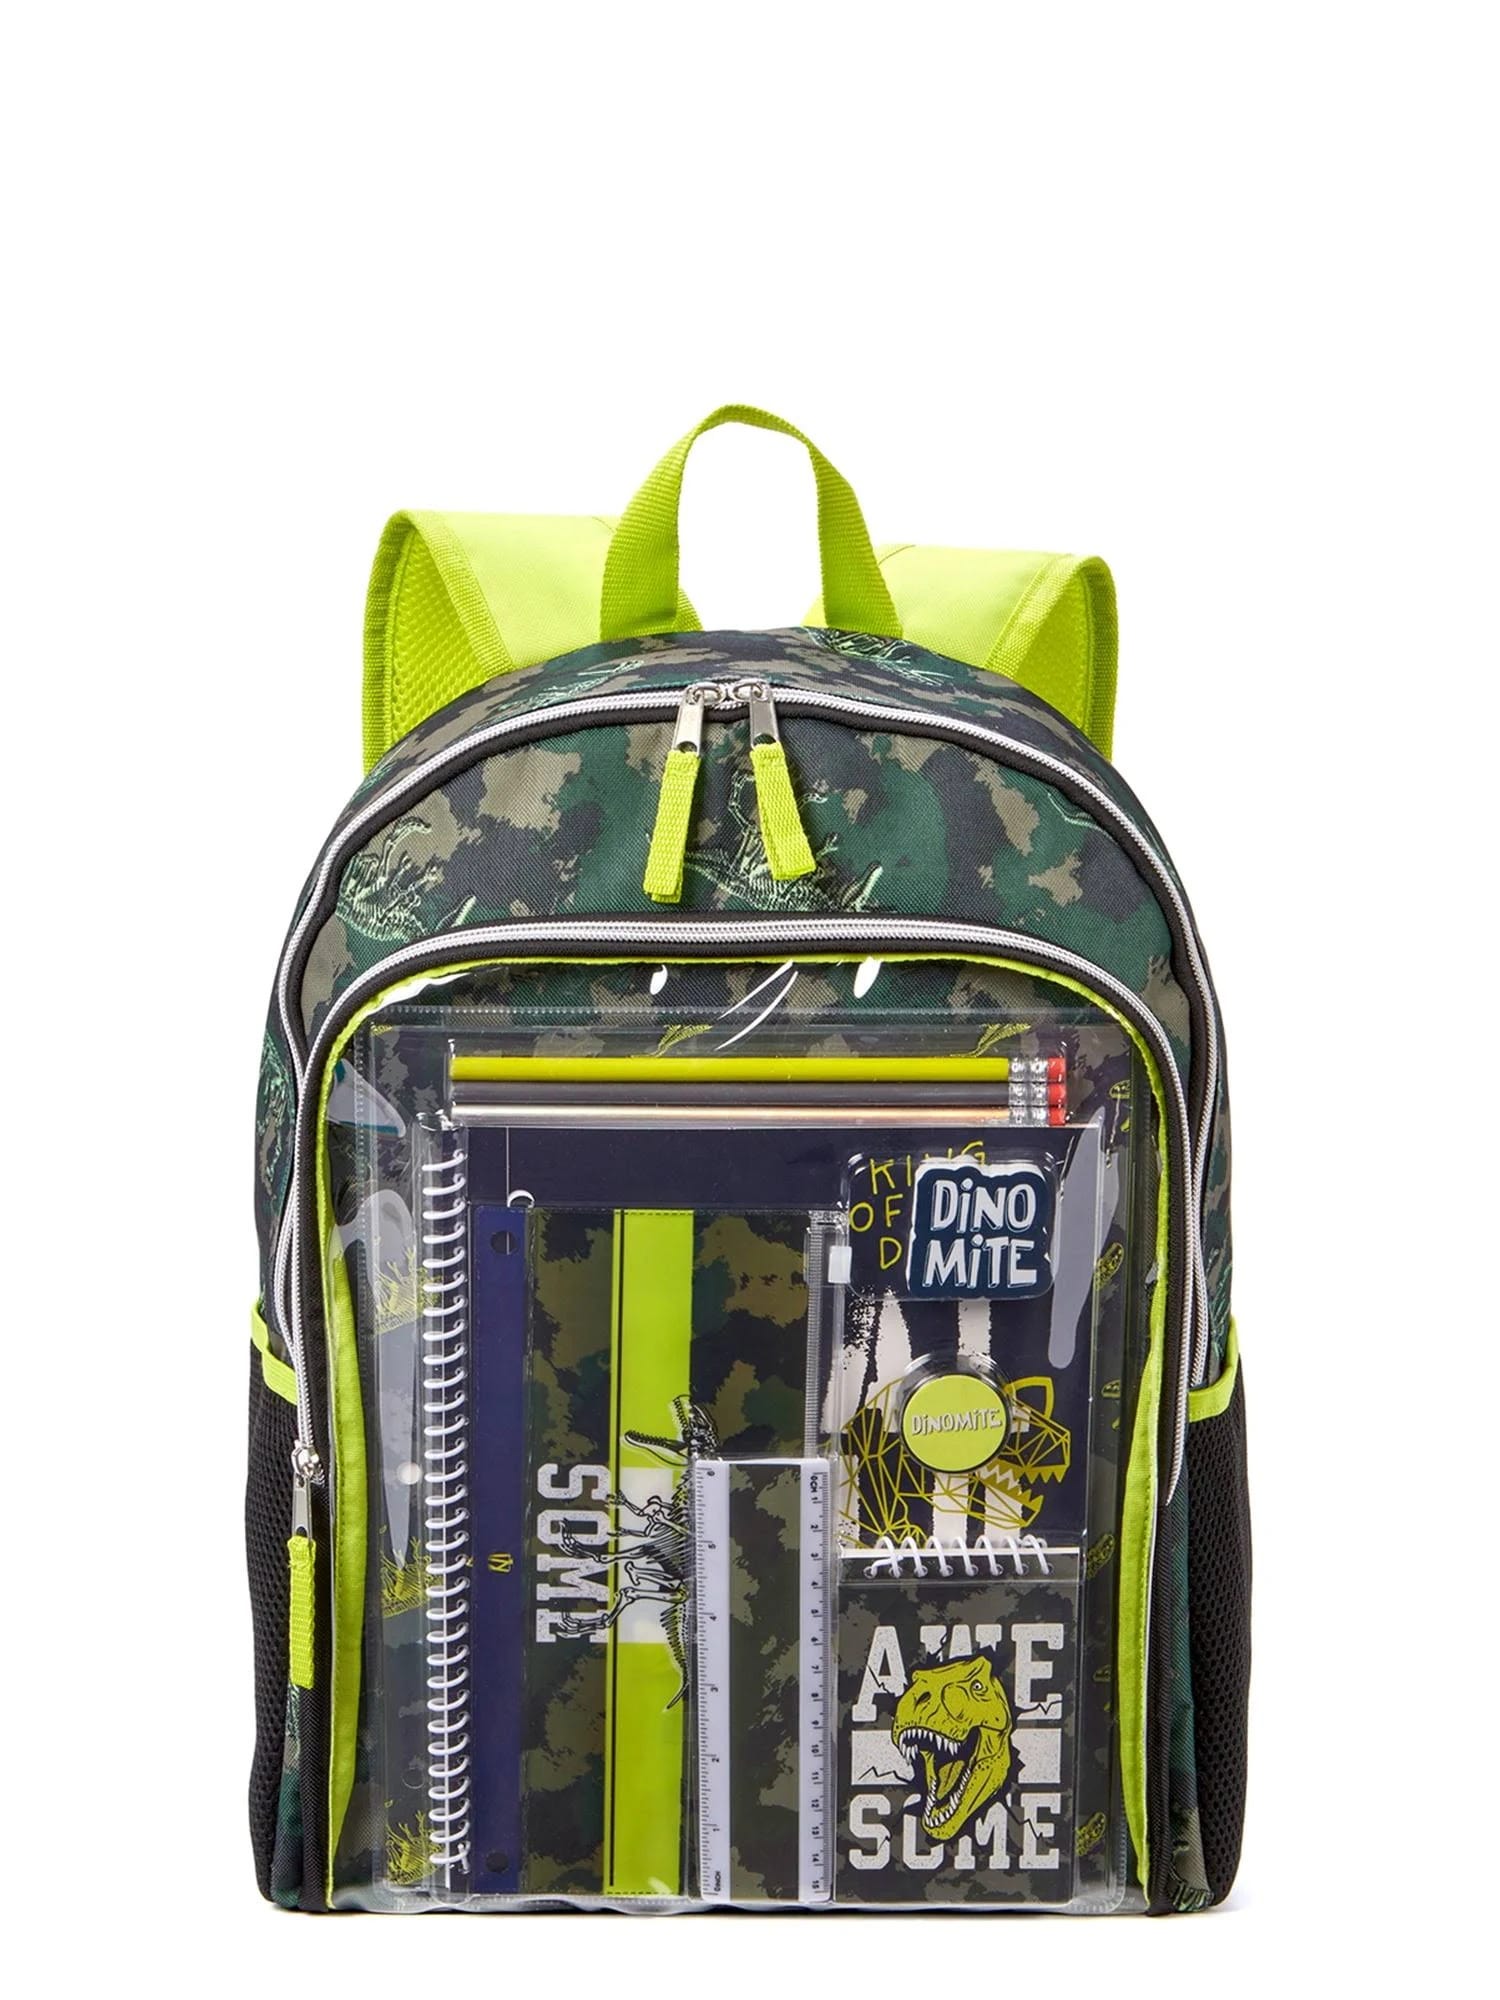 Schoolyard Vibes Dinosaur Print Backpack with Stationary Set (Green) | Image